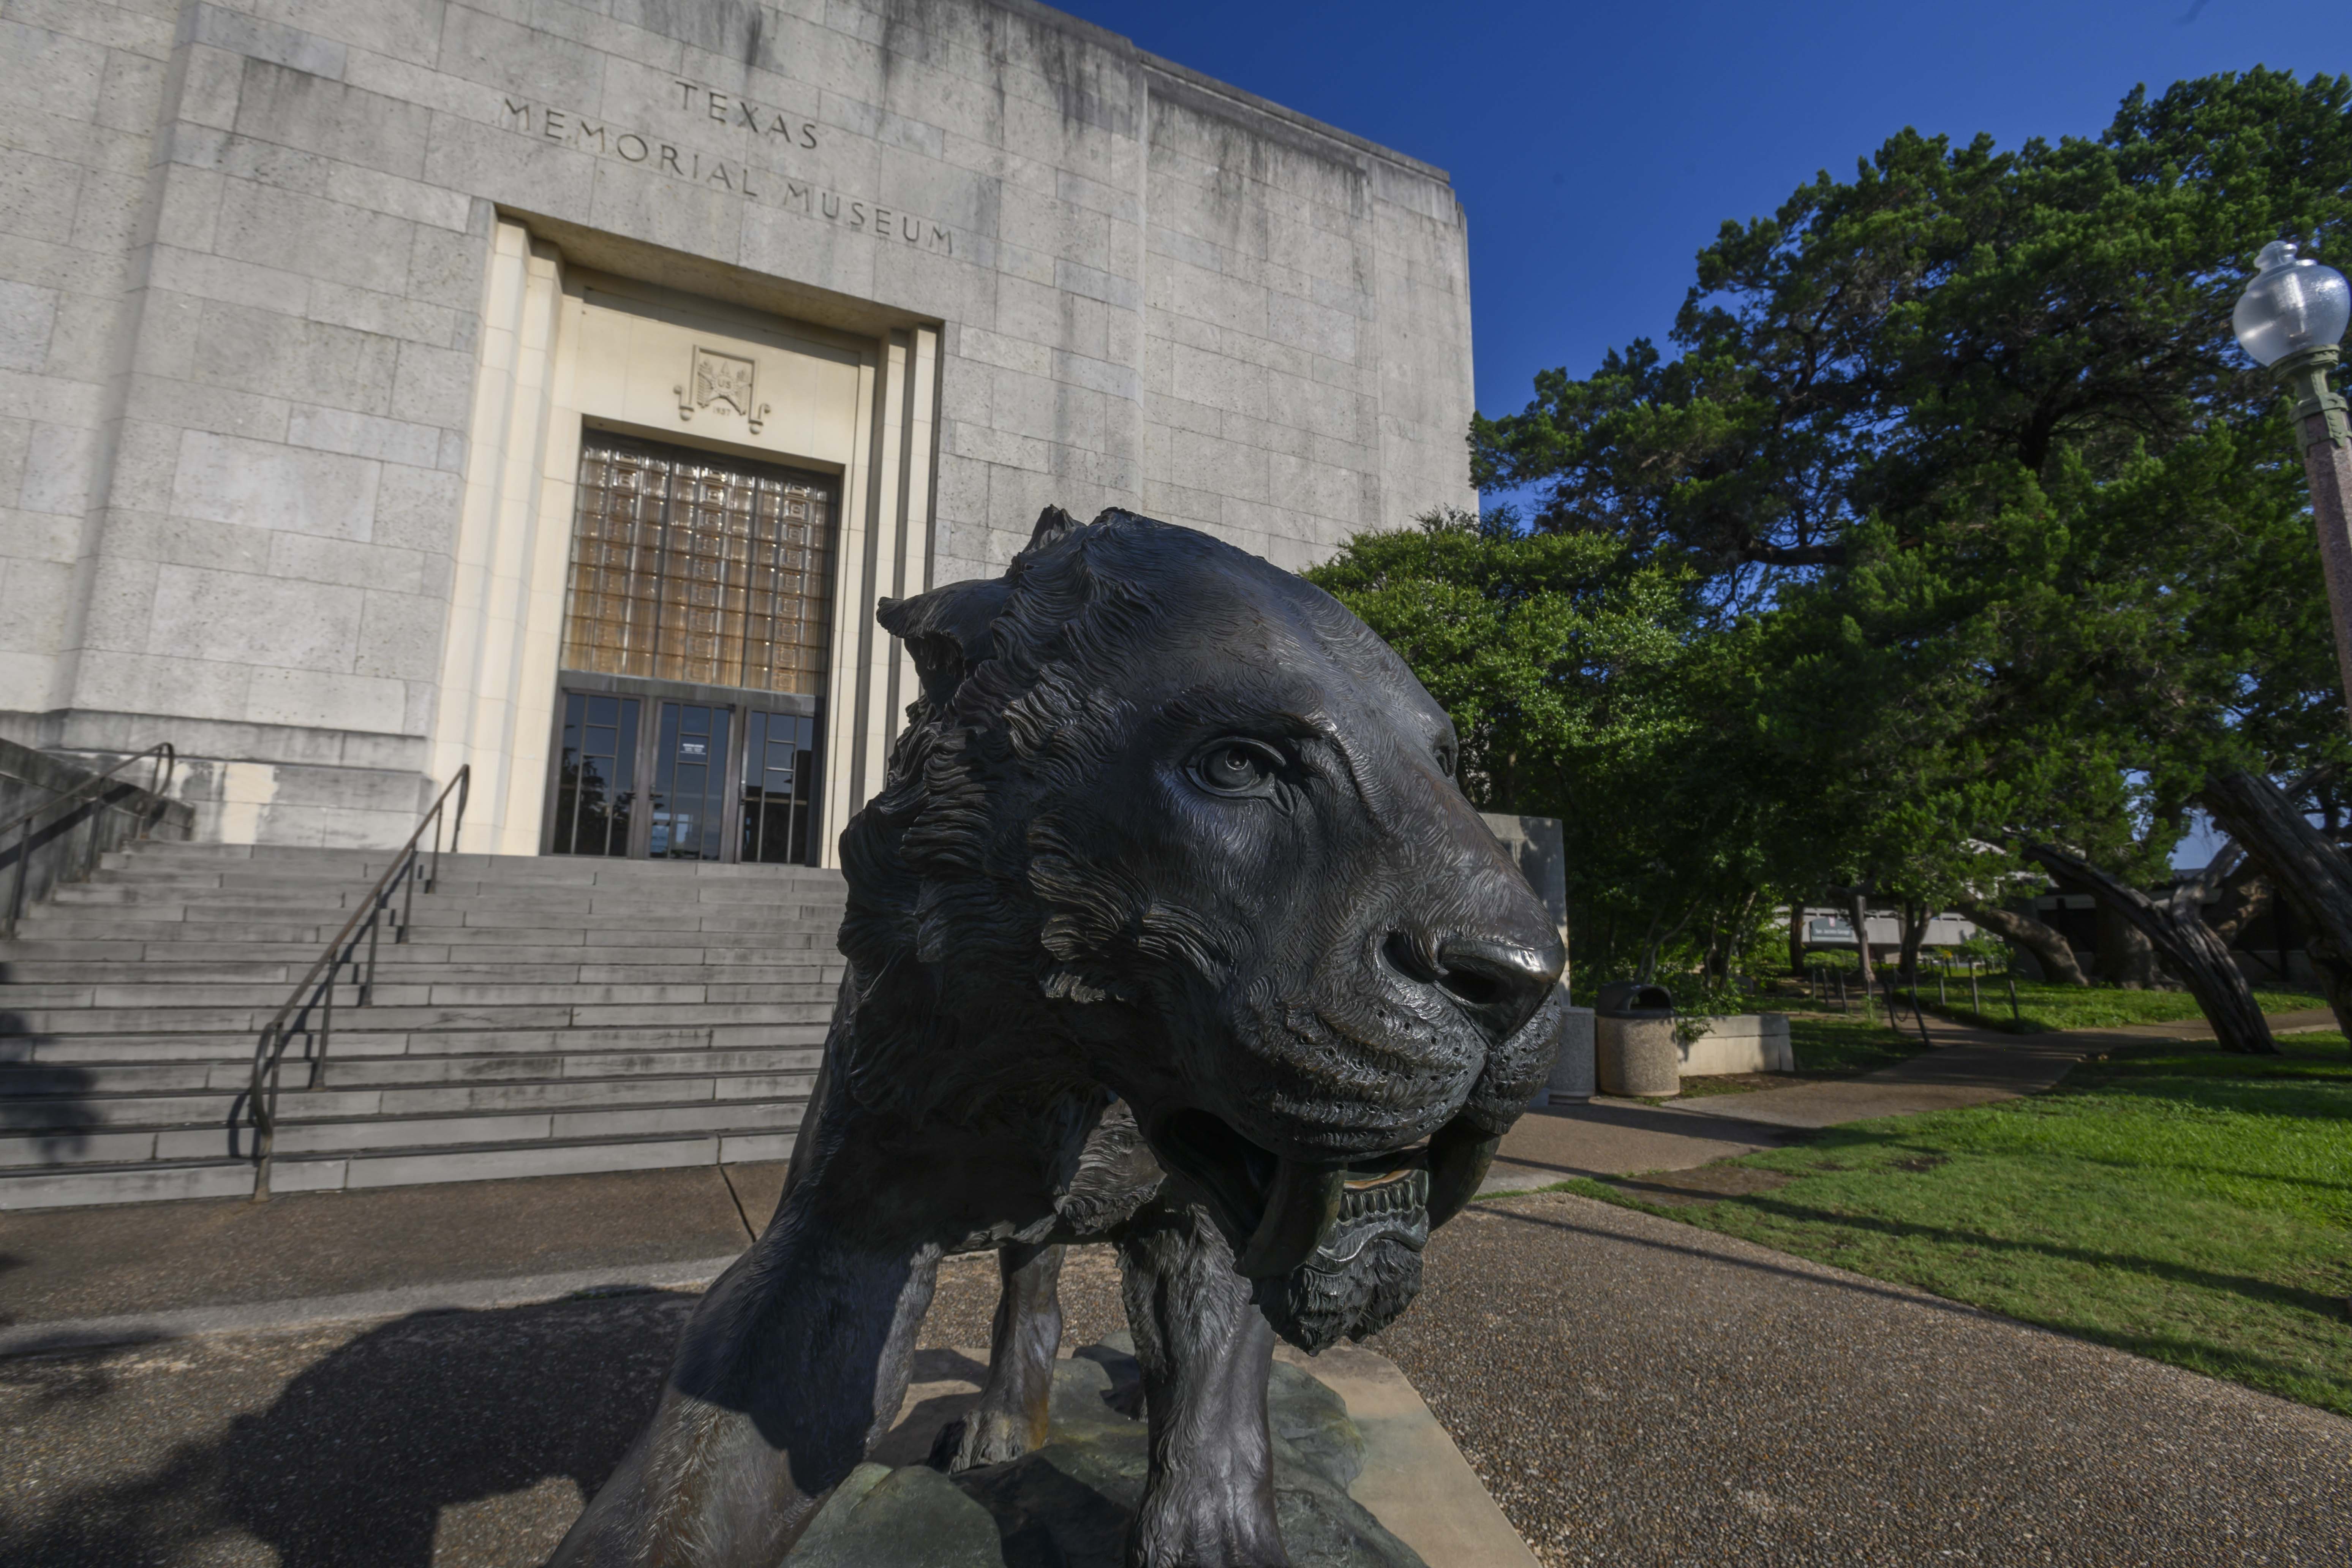 Exterior of the museum with saber tooth cat sculpture in foreground